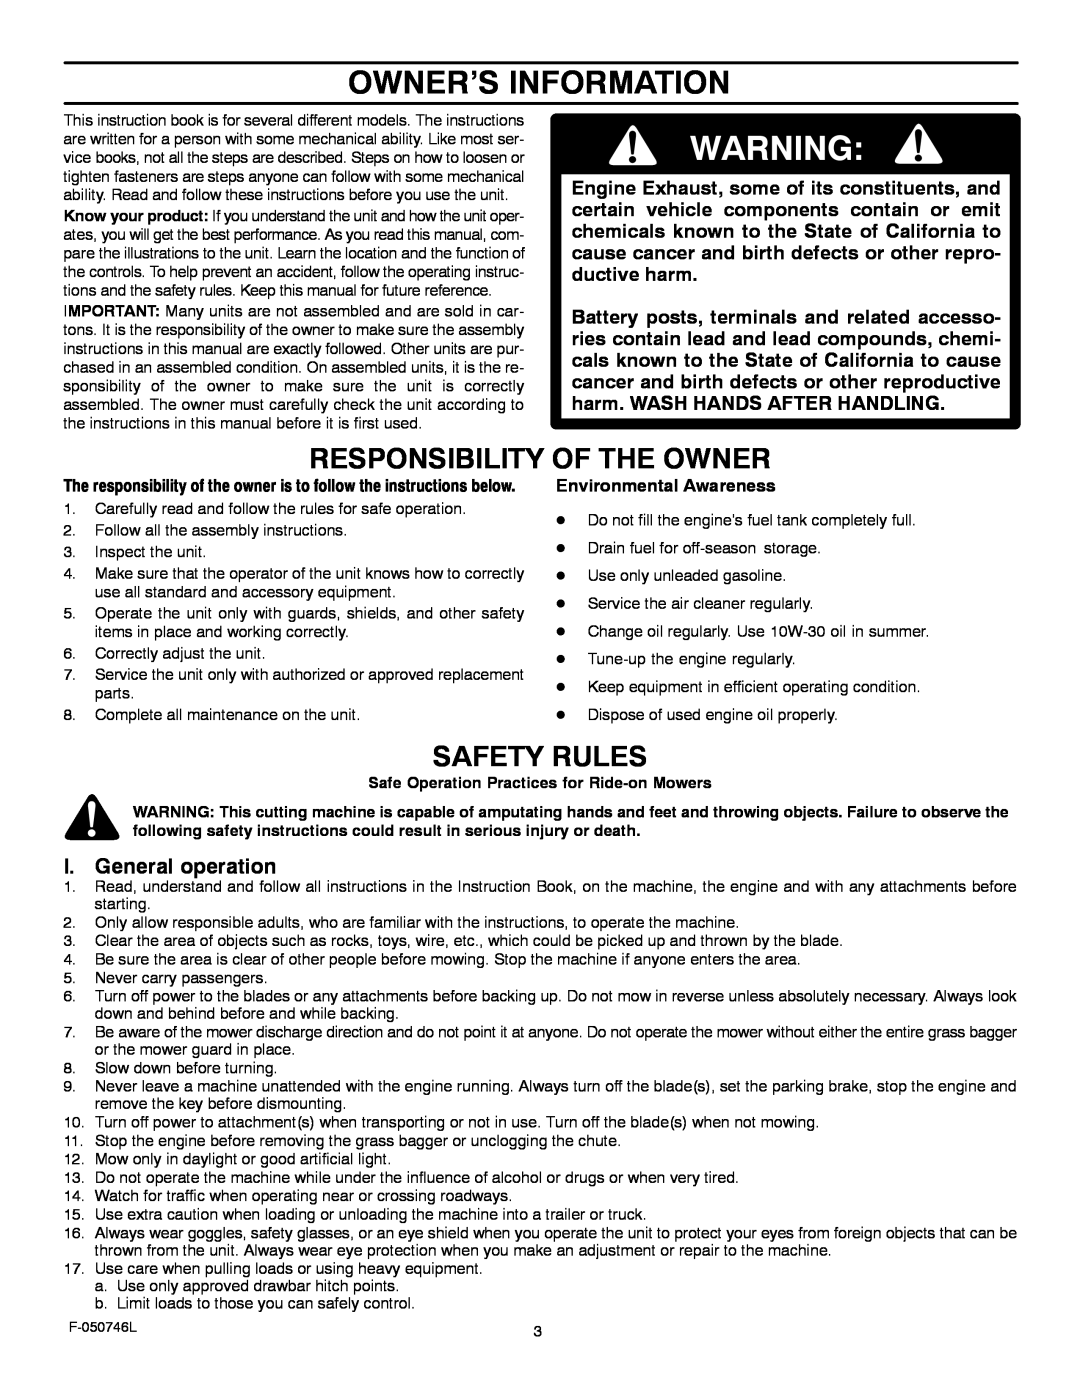 Murray 425016x48A manual Owner’S Information, Responsibility Of The Owner, Safety Rules, I. General operation 